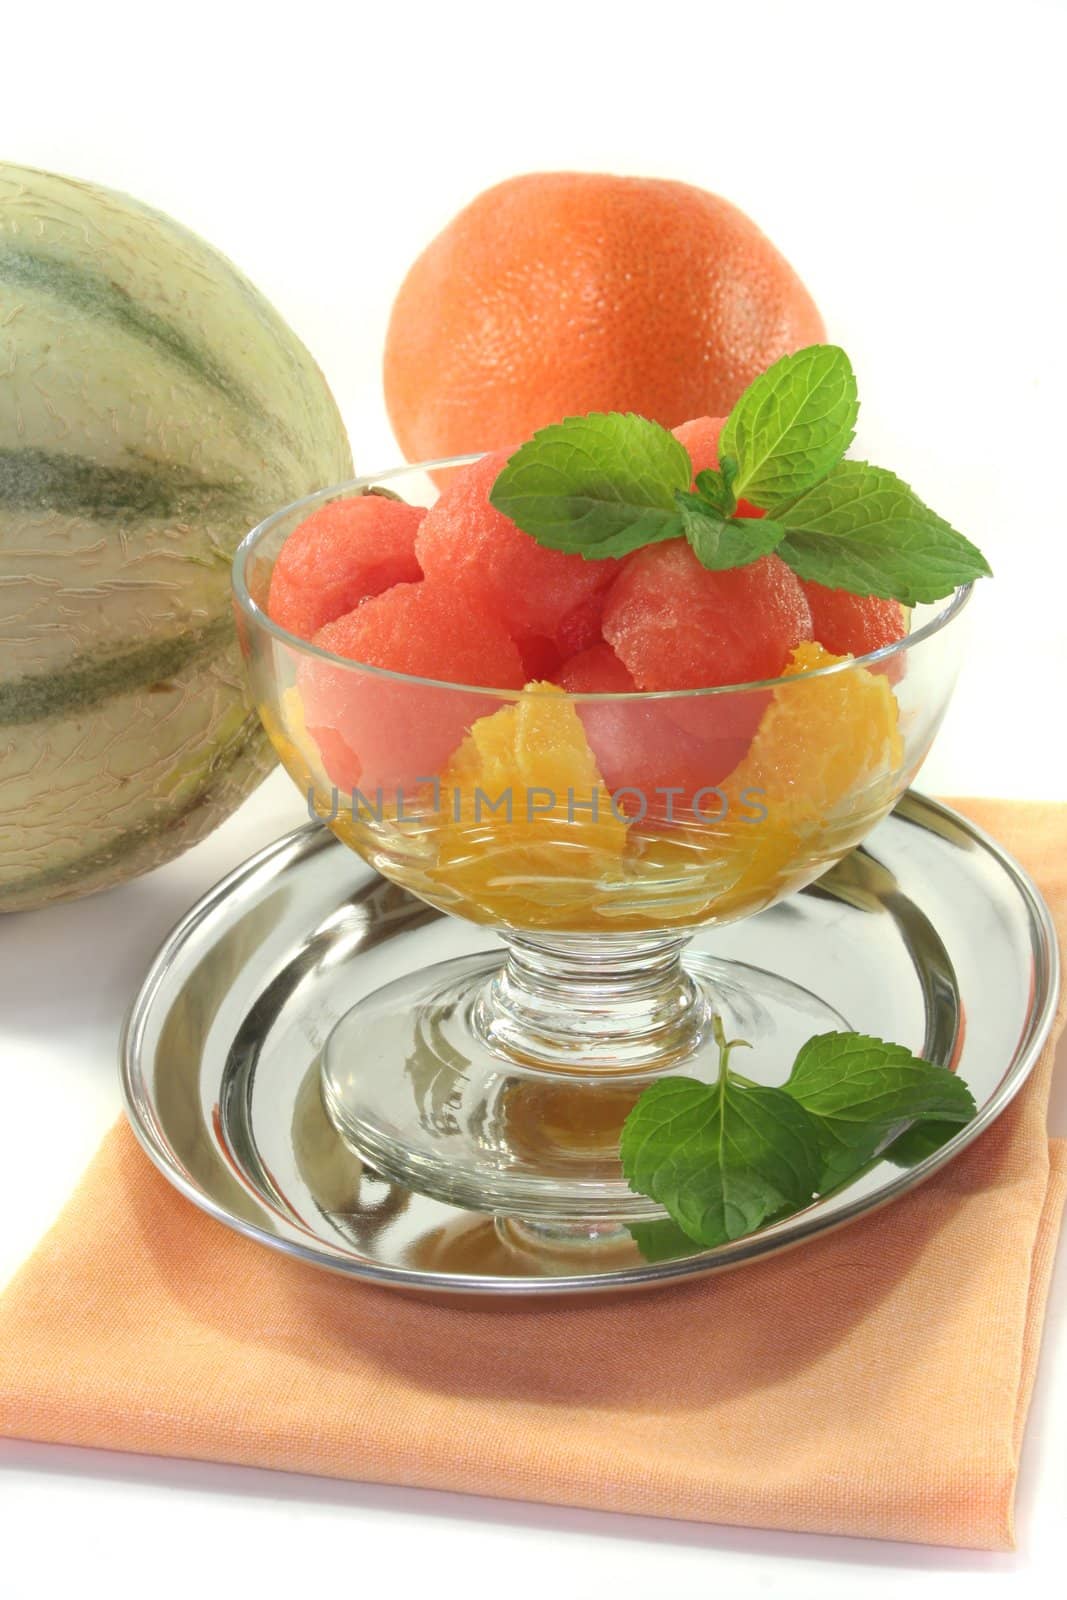 Melon orange salad with fresh peppermint in a bowl